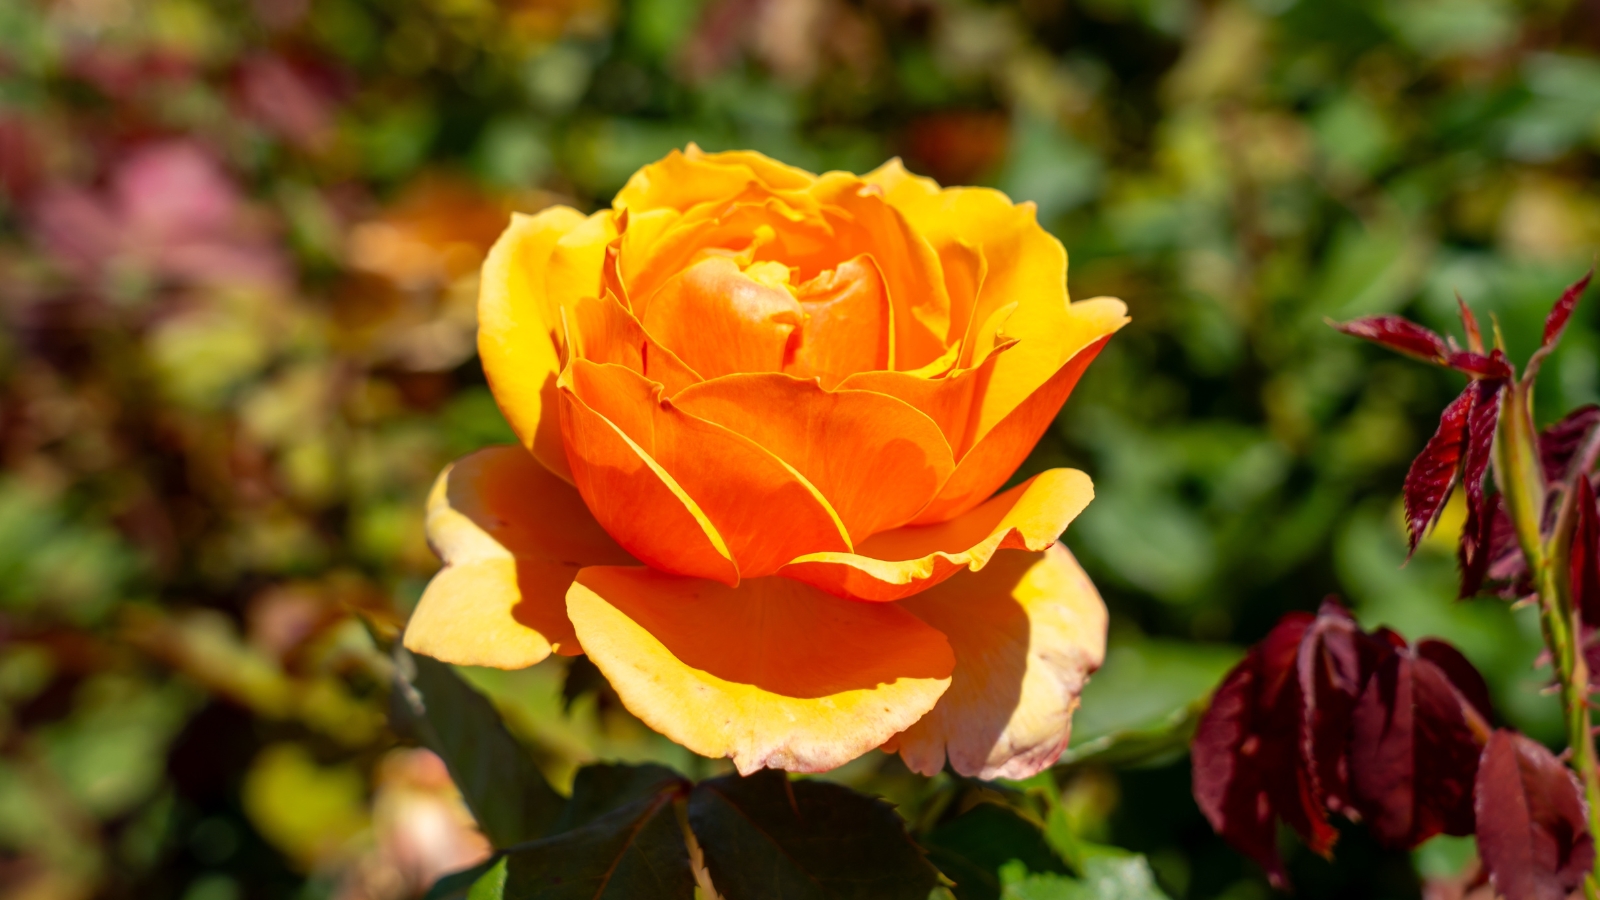 A vibrant orange 'About Face' rose basking in sunlight, set against a lush green backdrop, creating a serene and vivid image of nature's beauty.
